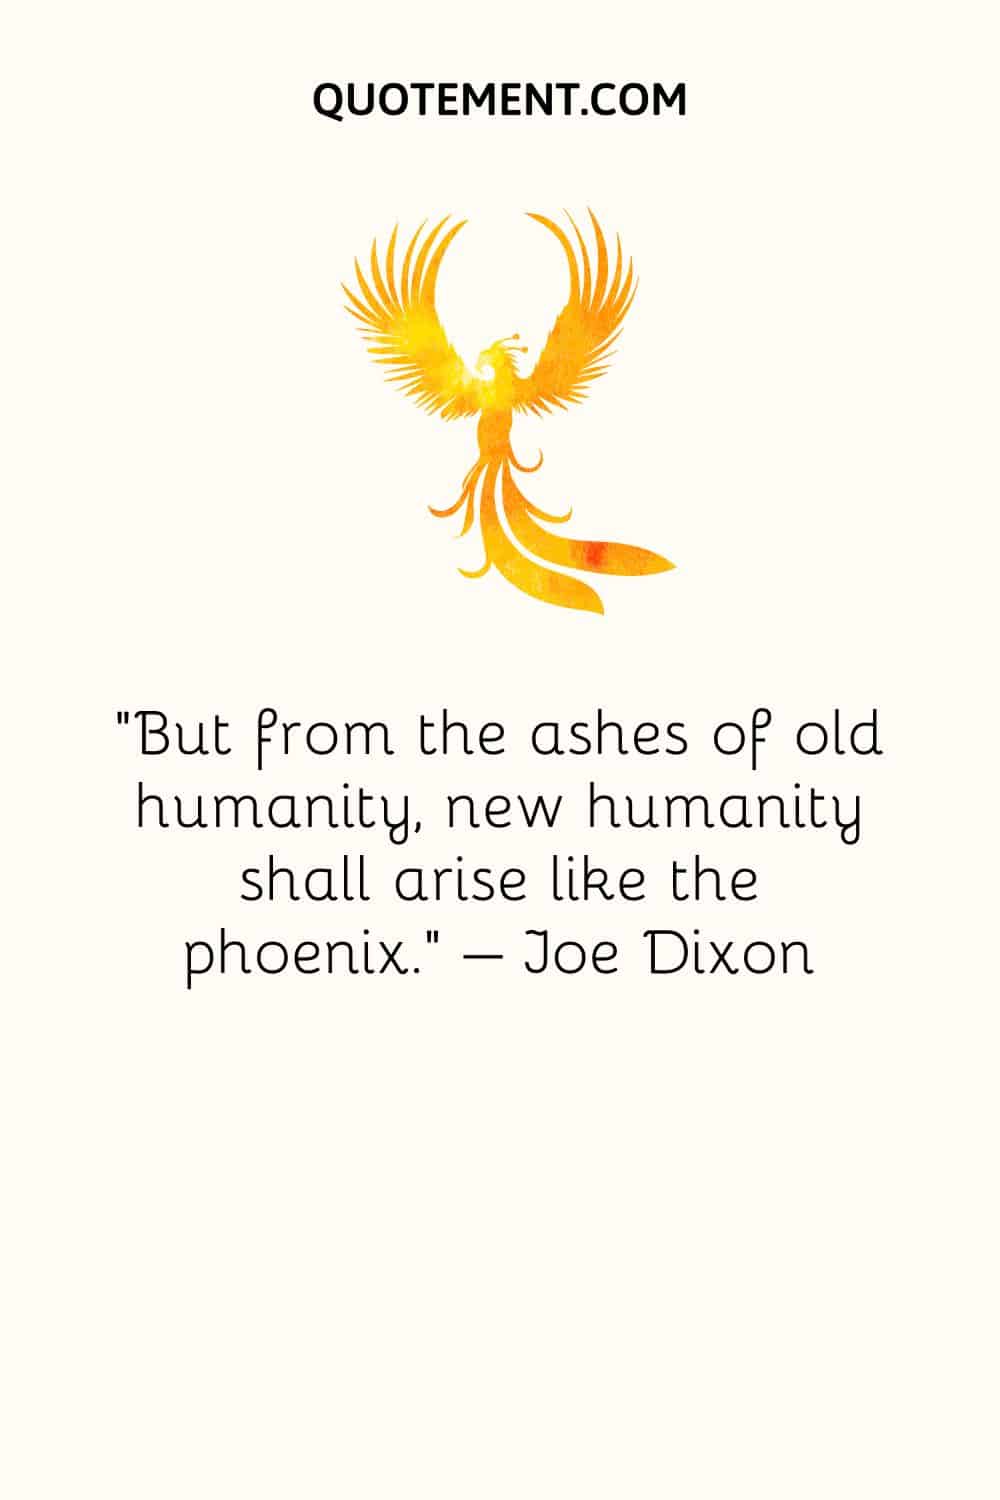 But from the ashes of old humanity, new humanity shall arise like the phoenix